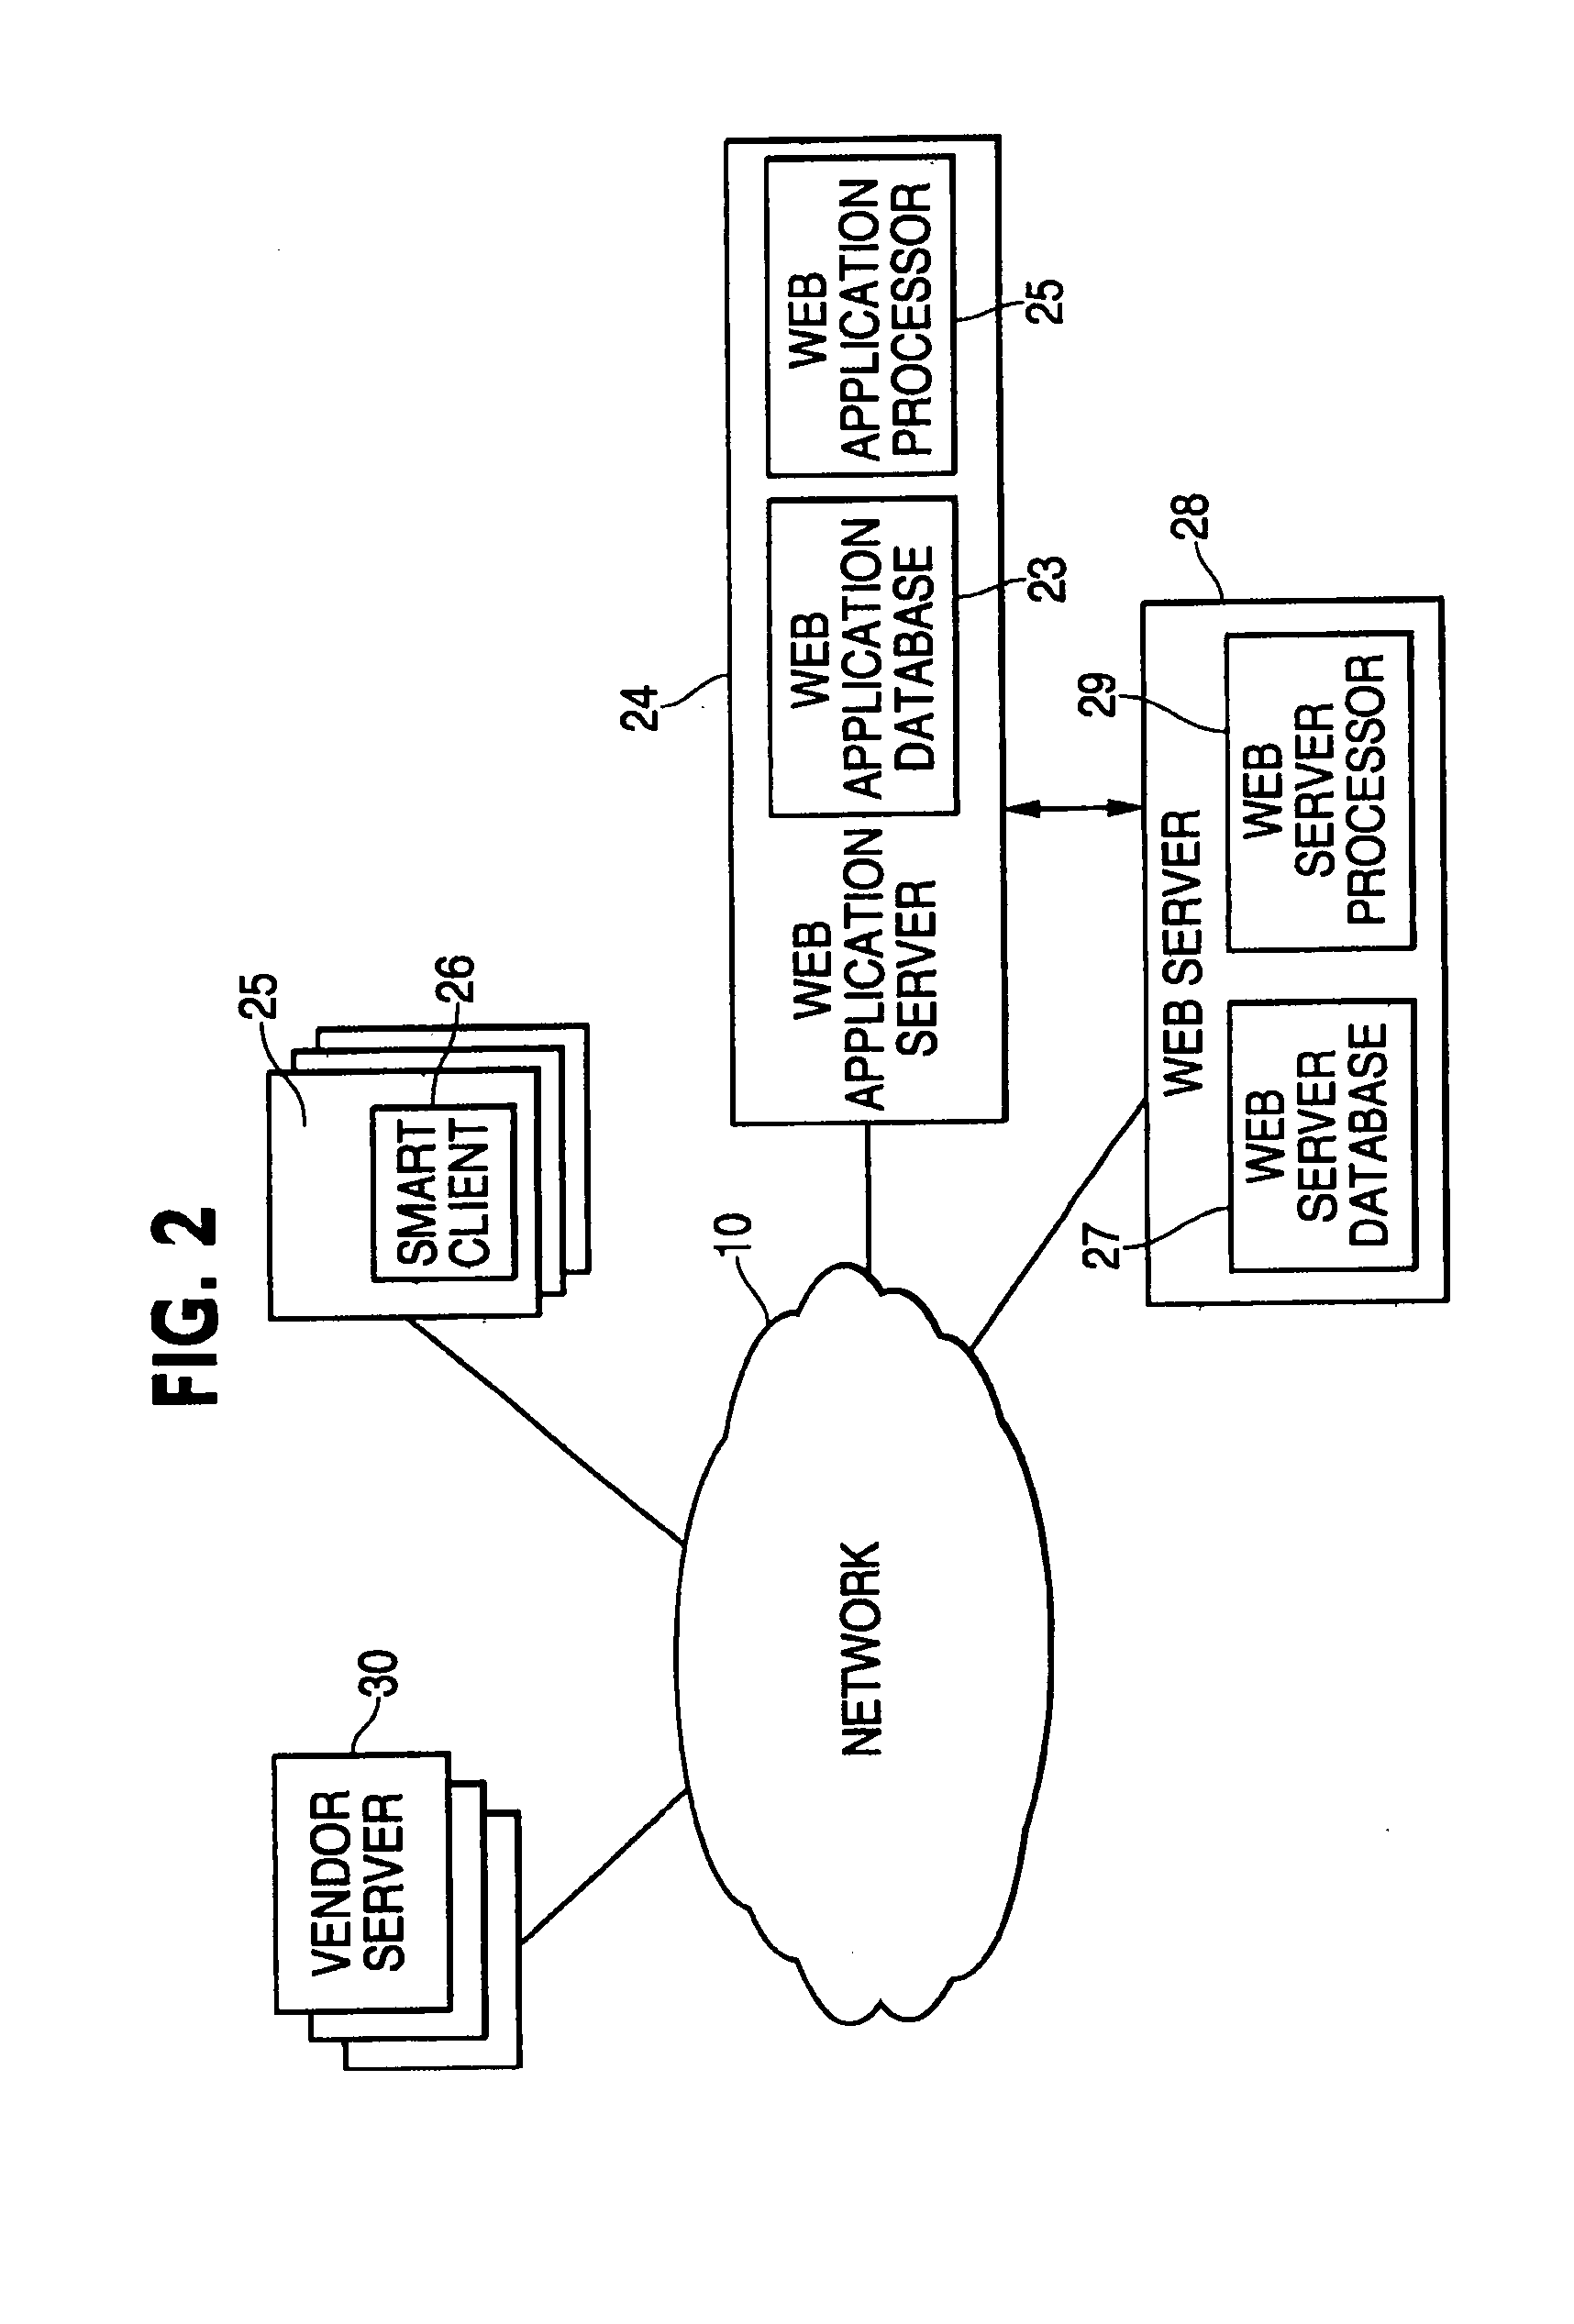 Web-based incentive system and method